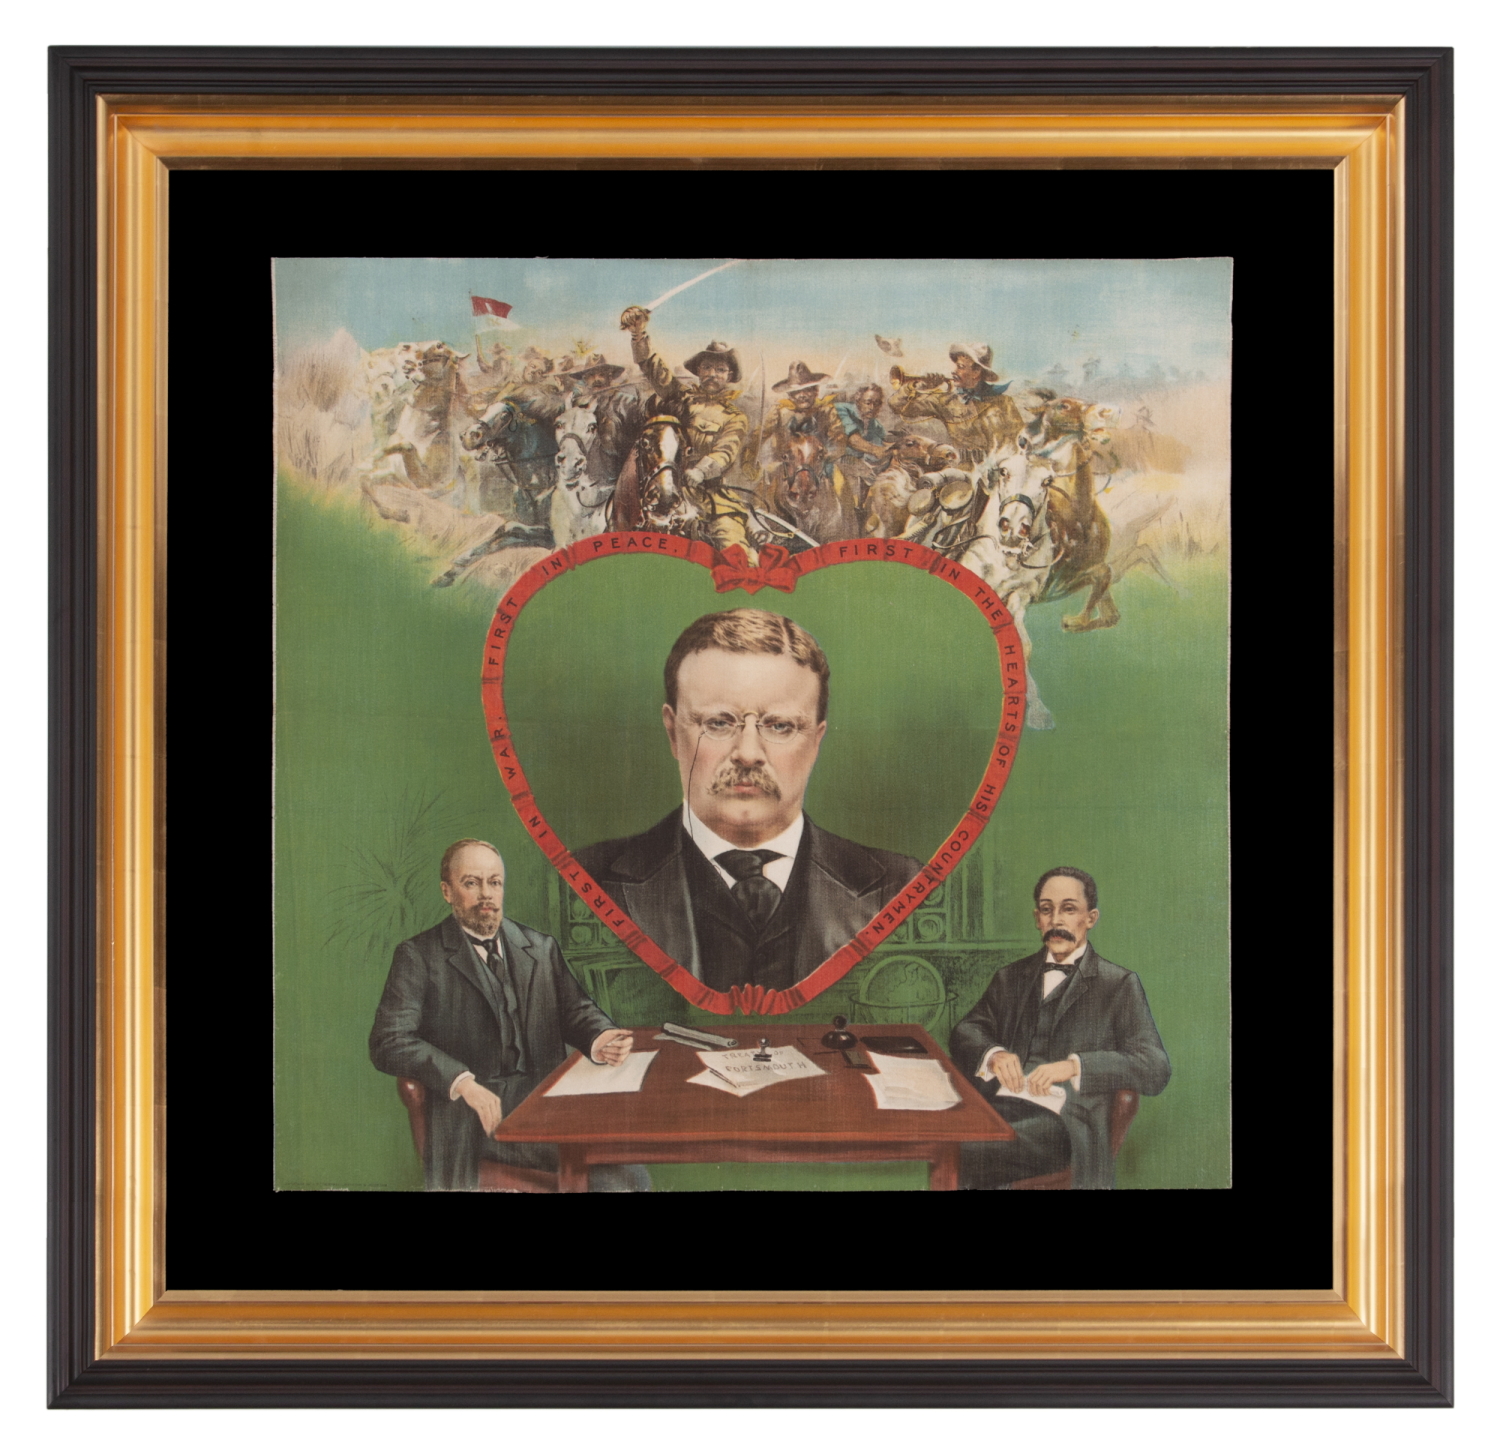 BOLDLY GRAPHIC AND COLORFUL TEDDY ROOSEVELT TEXTILE, WITH HIS PORTRAIT IN A LARGE HEART AND ROUGH RIDERS ABOVE, MADE TO CELEBRATE HIS RECEIPT OF THE NOBEL PRIZE FOR PEACE IN 1906